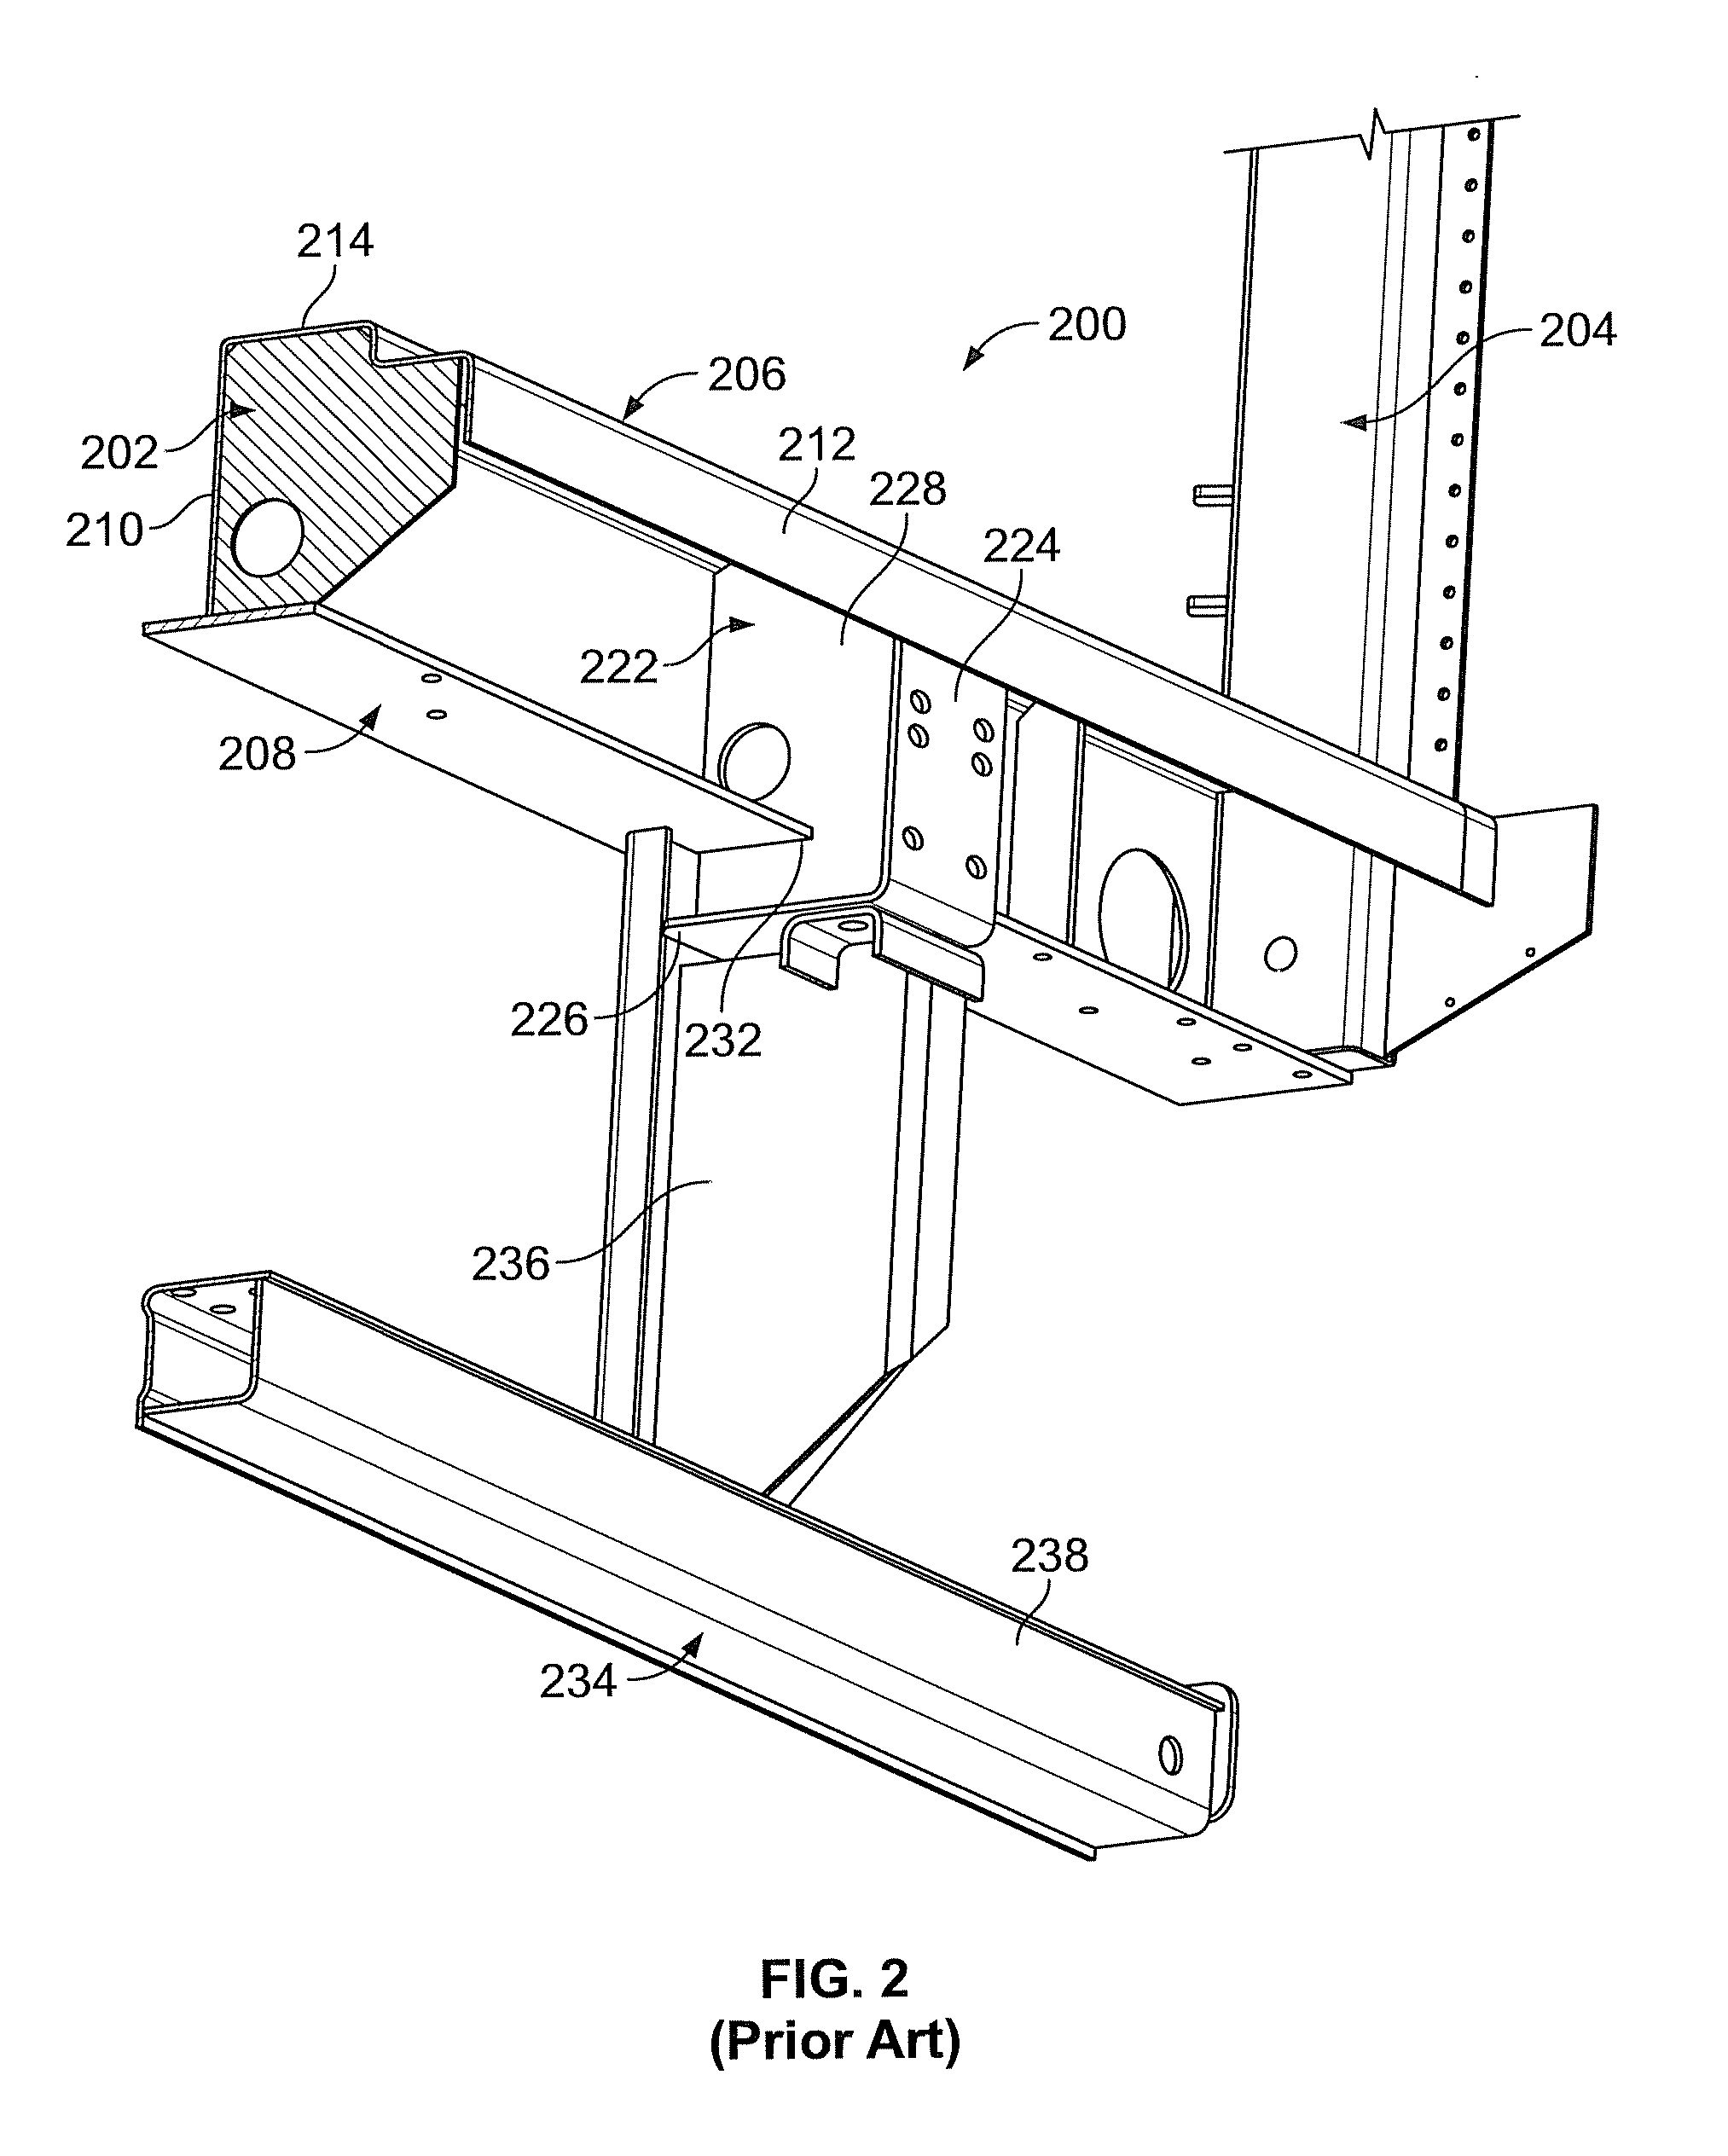 Trailer rear door frame with angled rear sill